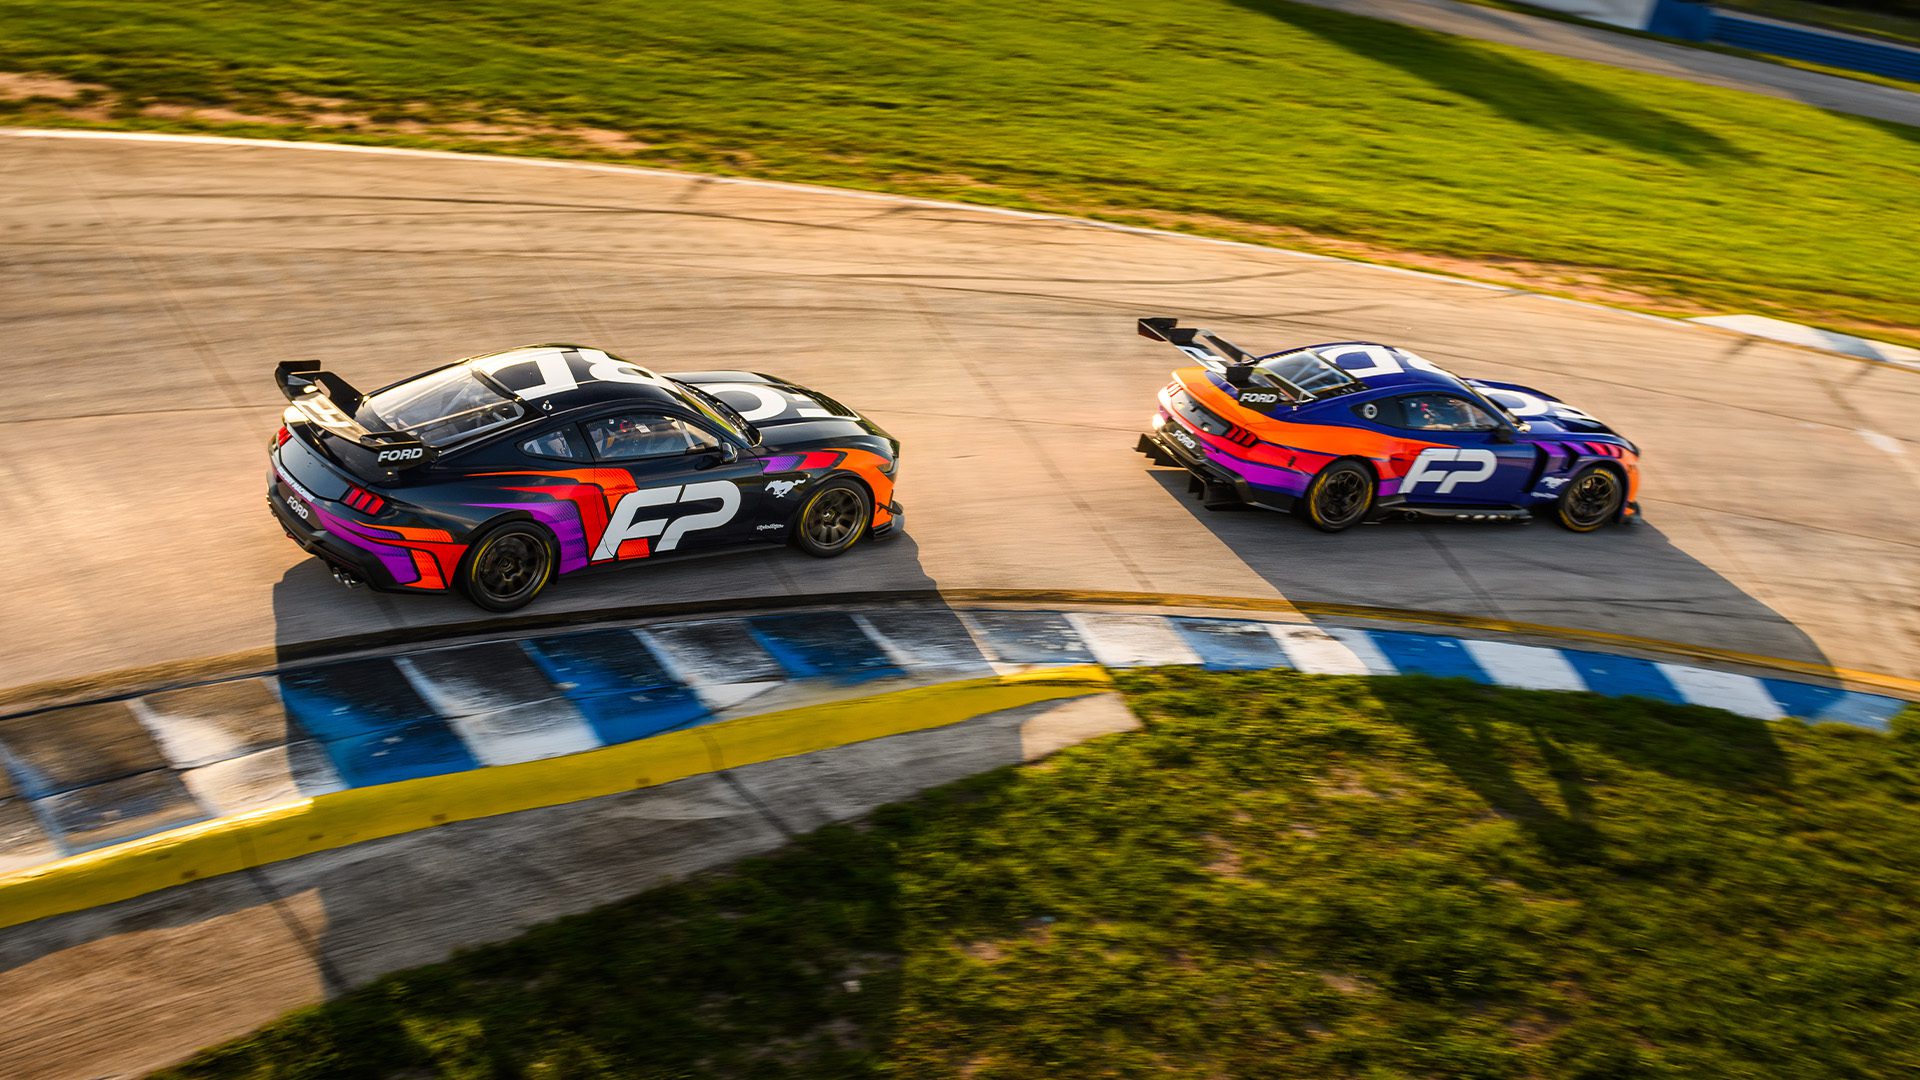 Multimatic Motorsport programs include the Ford Mustang GT3 and GT4 race cars.